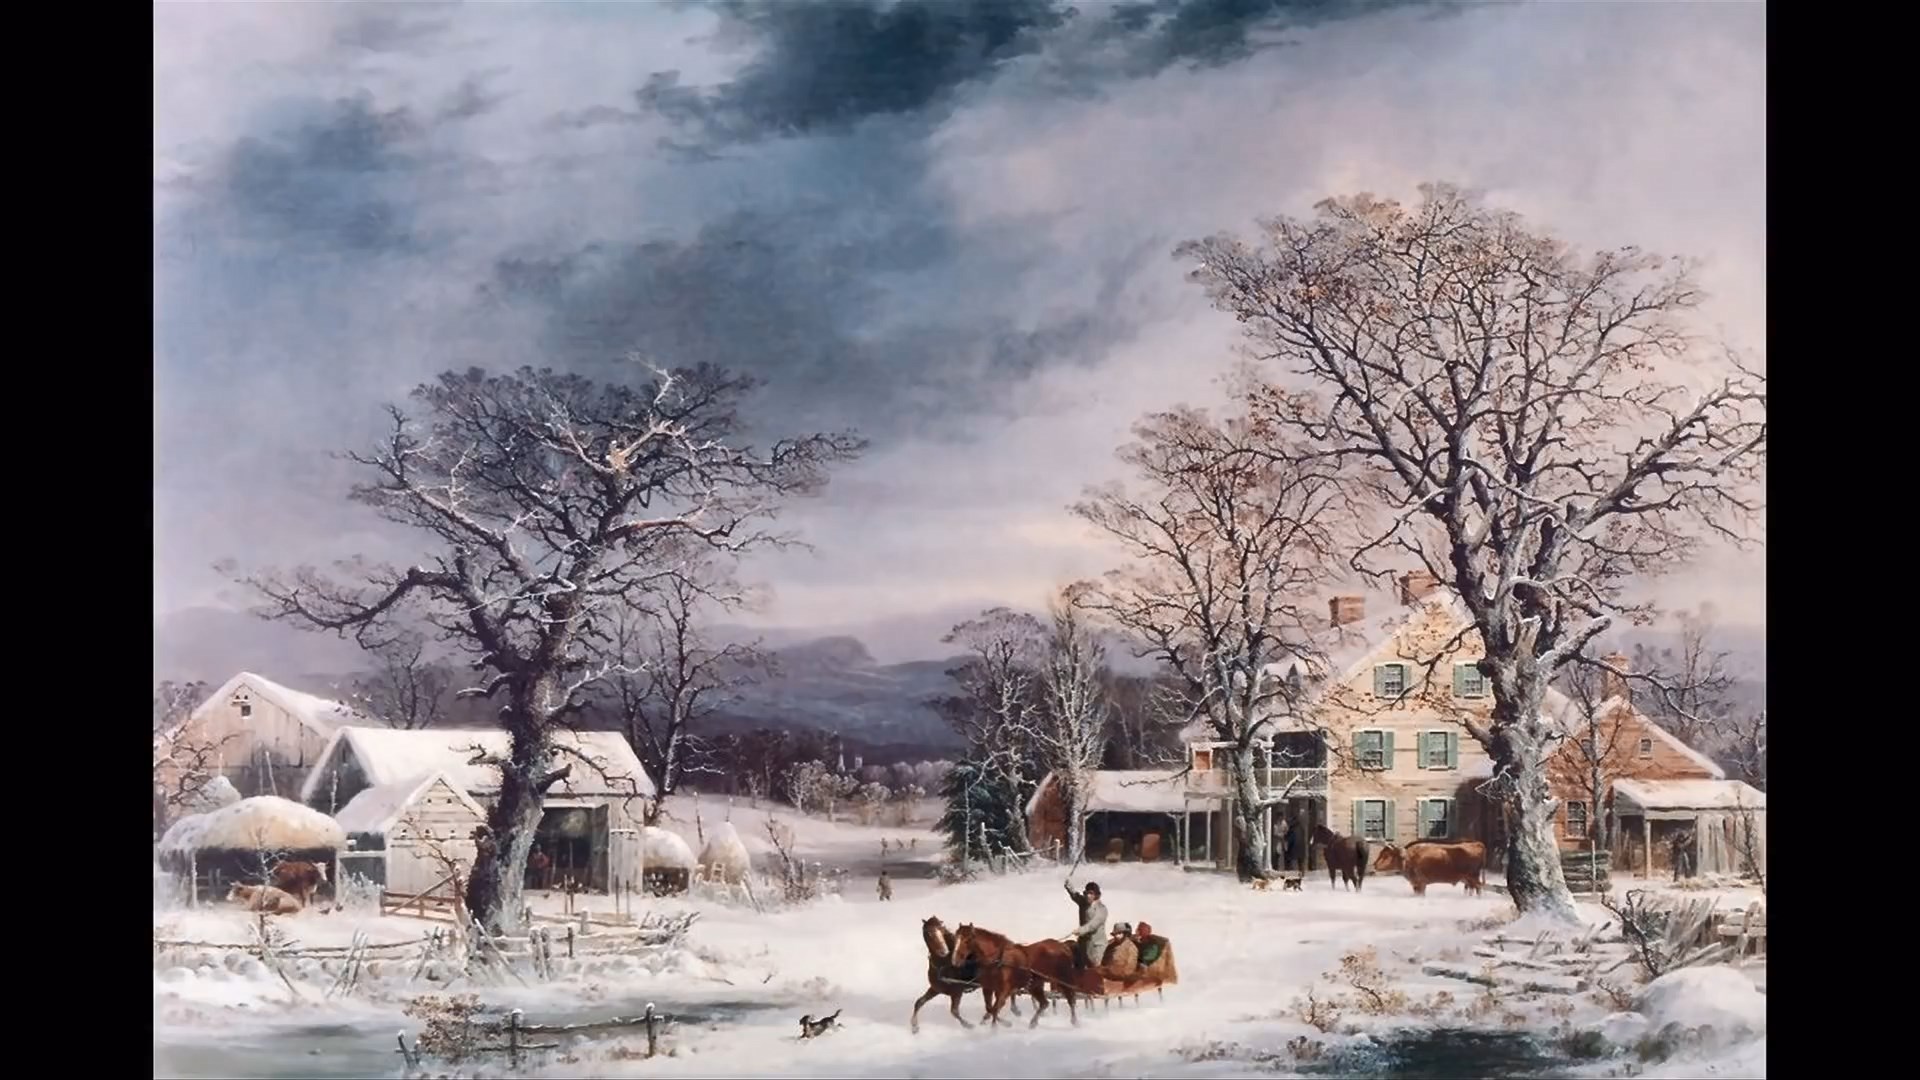 OLD FASHIONED CHRISTMAS AND WINTER SCENES d.jpg